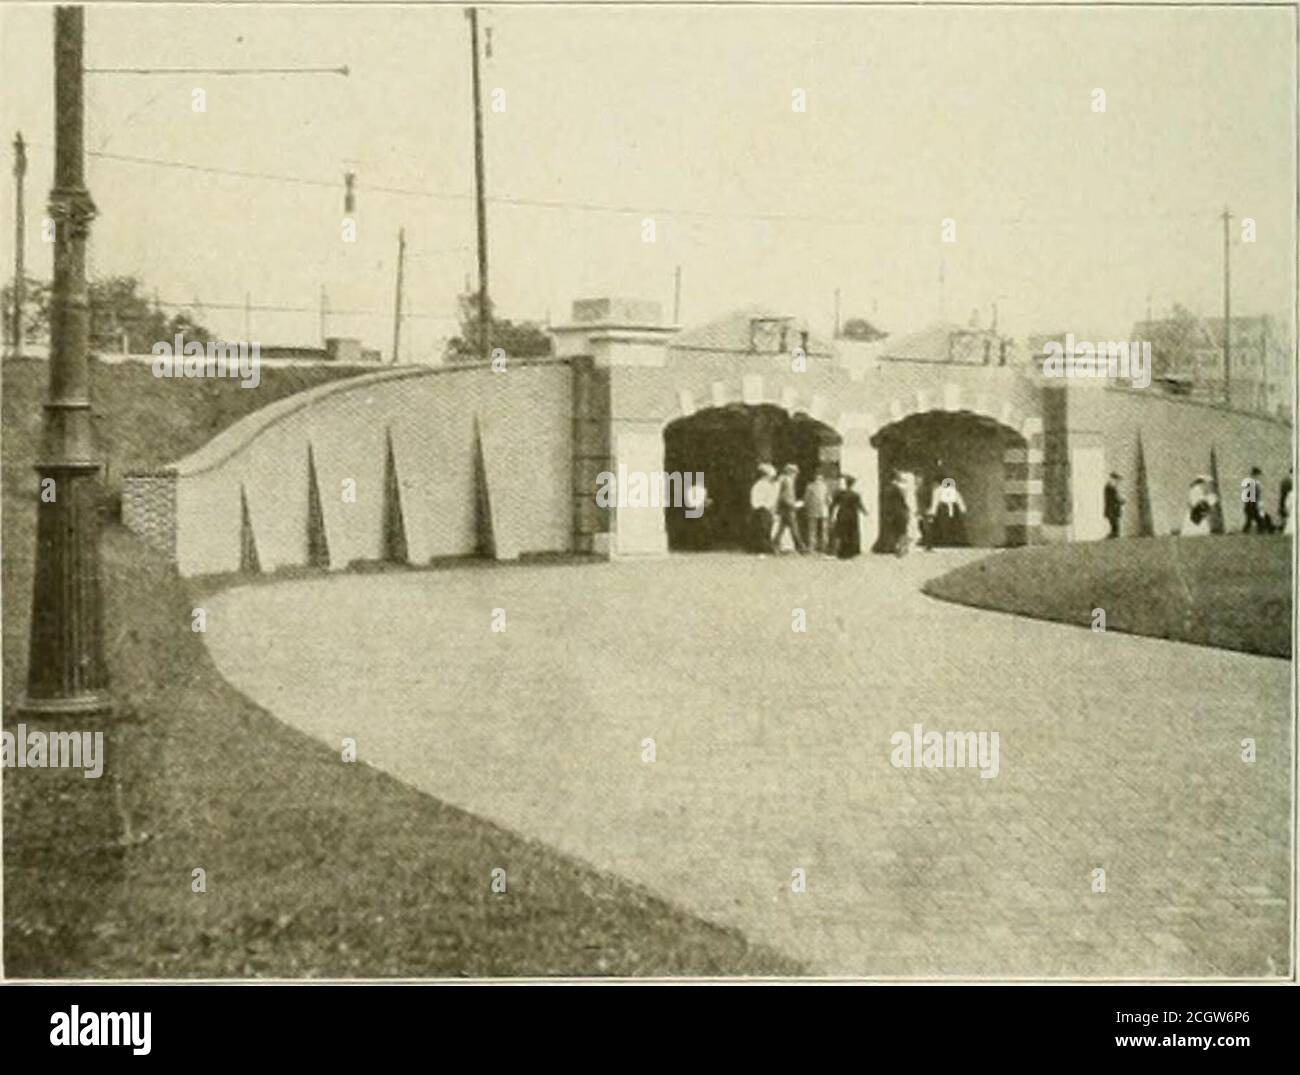 . The street railway review . BRICK P.WED HIGHWAY CROSSING. ing walls is shown herewith. This tunnel extends from the portalnear the music pavilion, under the tracks of the Doylestown andIlatboro lines, the Germantown turnpike and the several storagetracks of the Glenside and York Road lines. The walls of thetuimel are of concrete, the roof is of reinforced concrete and thedoor is paved with red brick. From the portal to the farther endof the tunnel a fence of steel rods divides the passageway intohalves thus separating the incoming passengers from those goingto the loading platforms. The seve Stock Photo